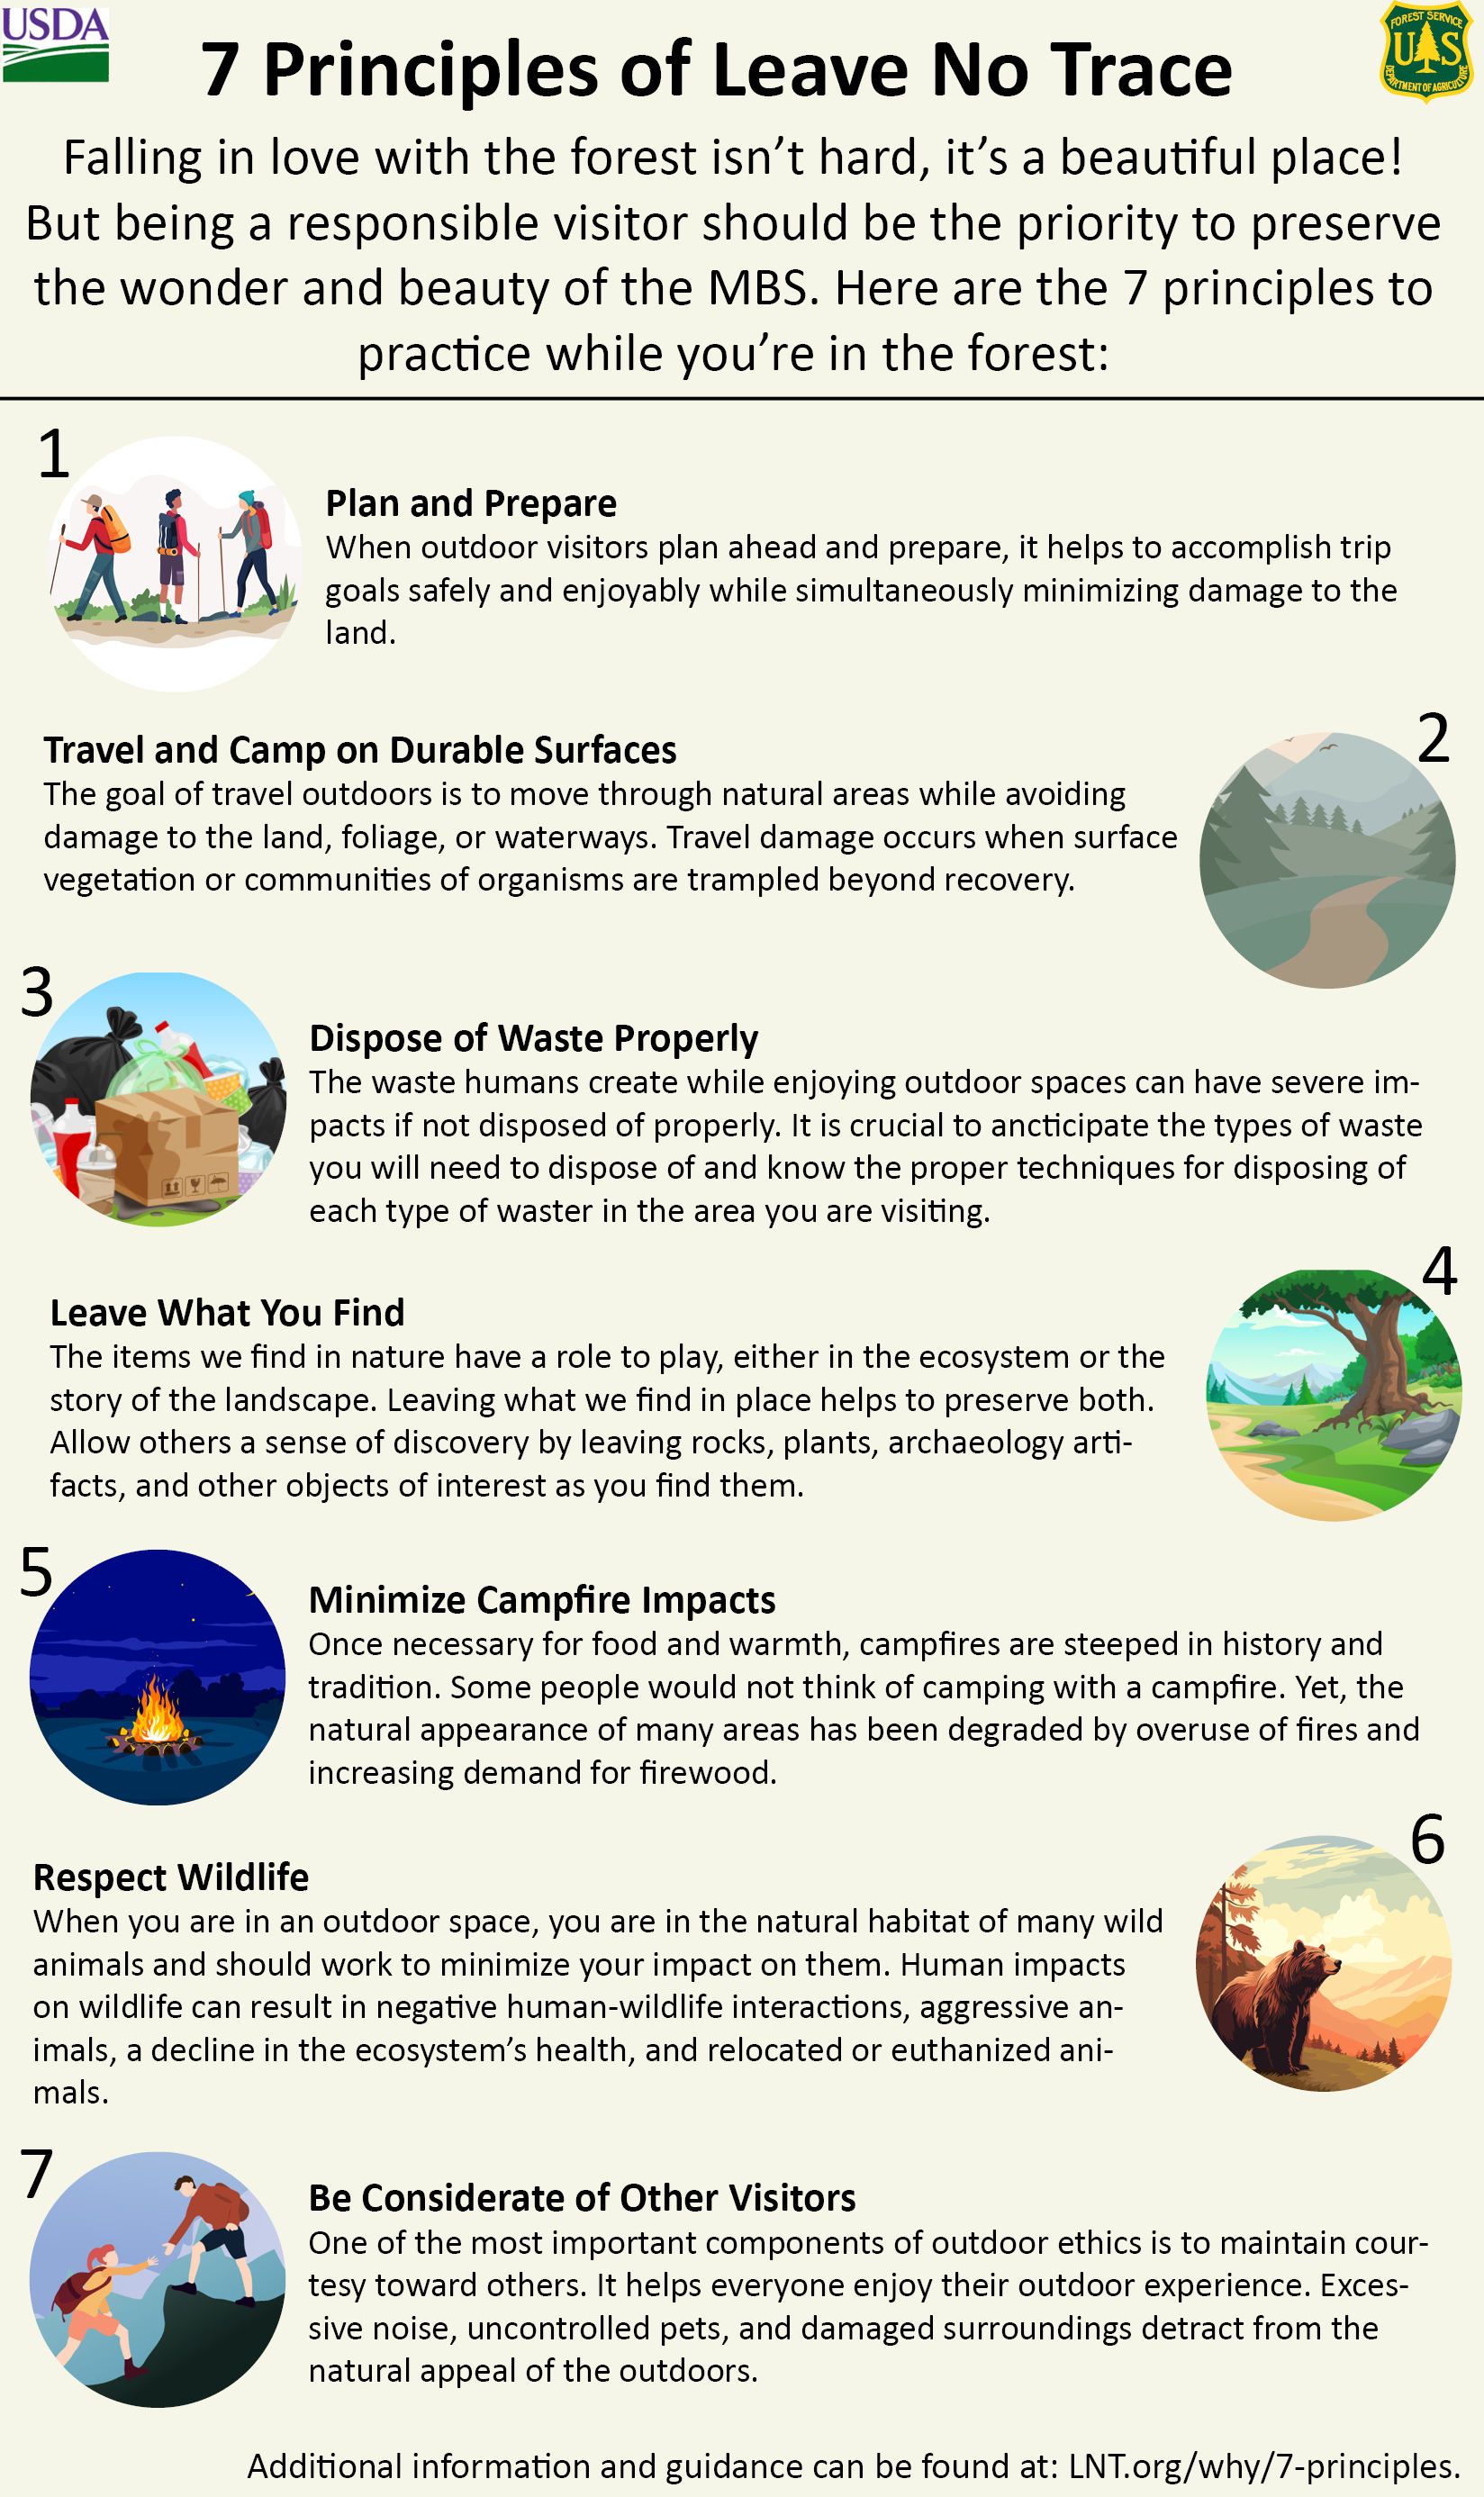 Leave No Trace Principles Infographic